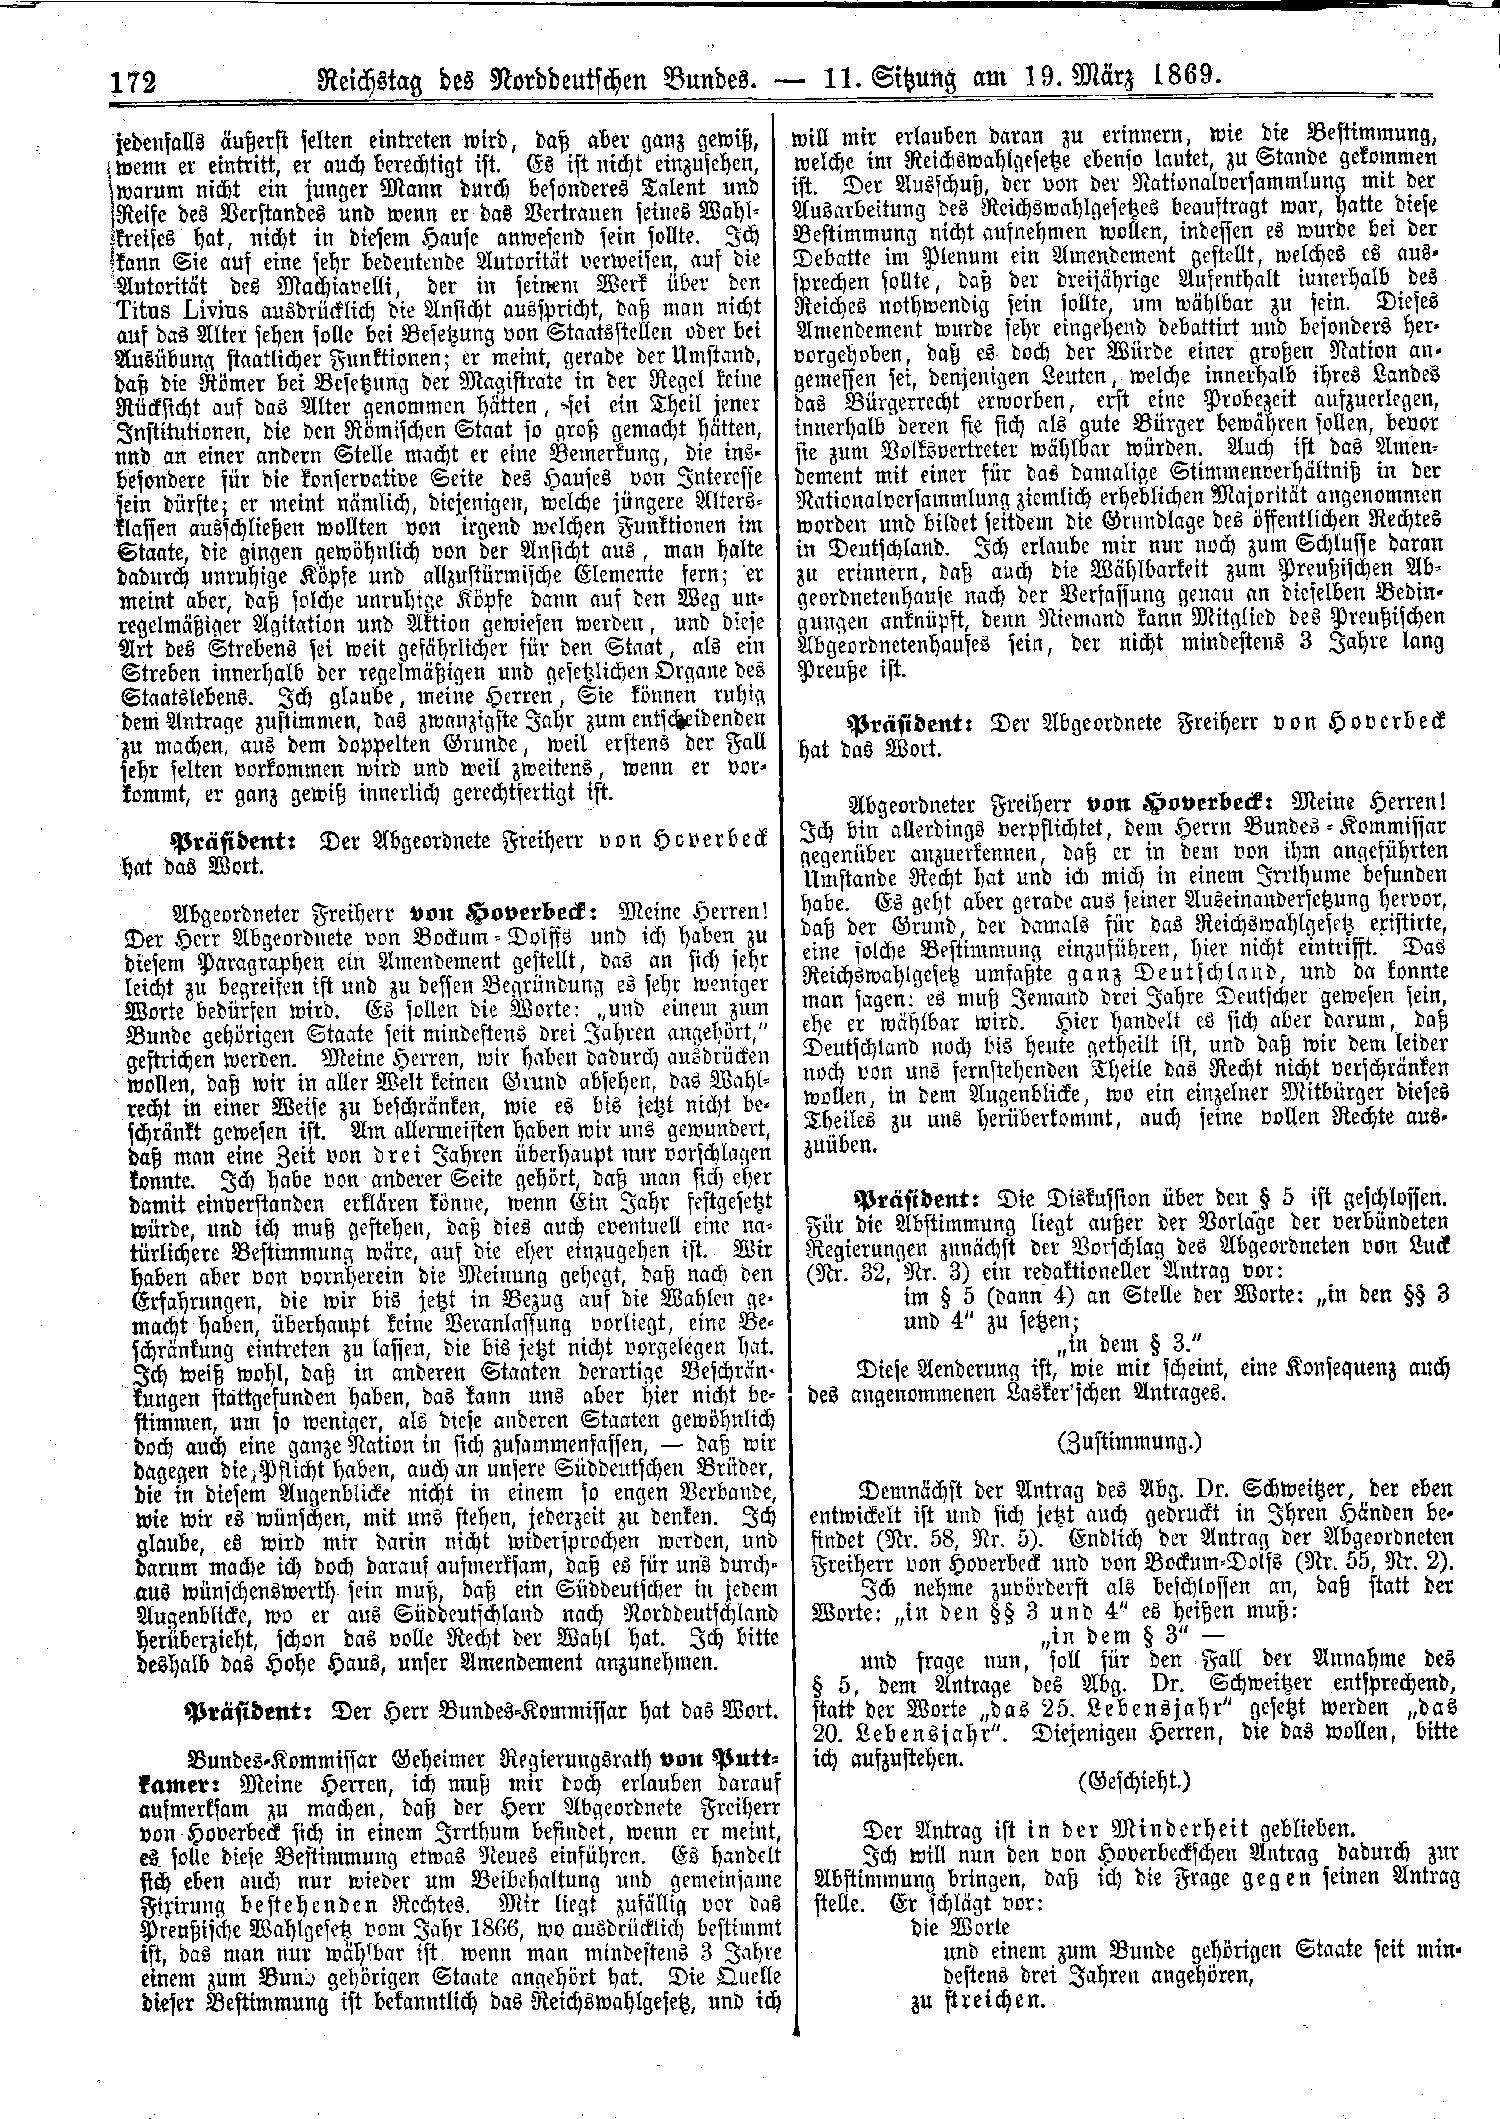 Scan of page 172